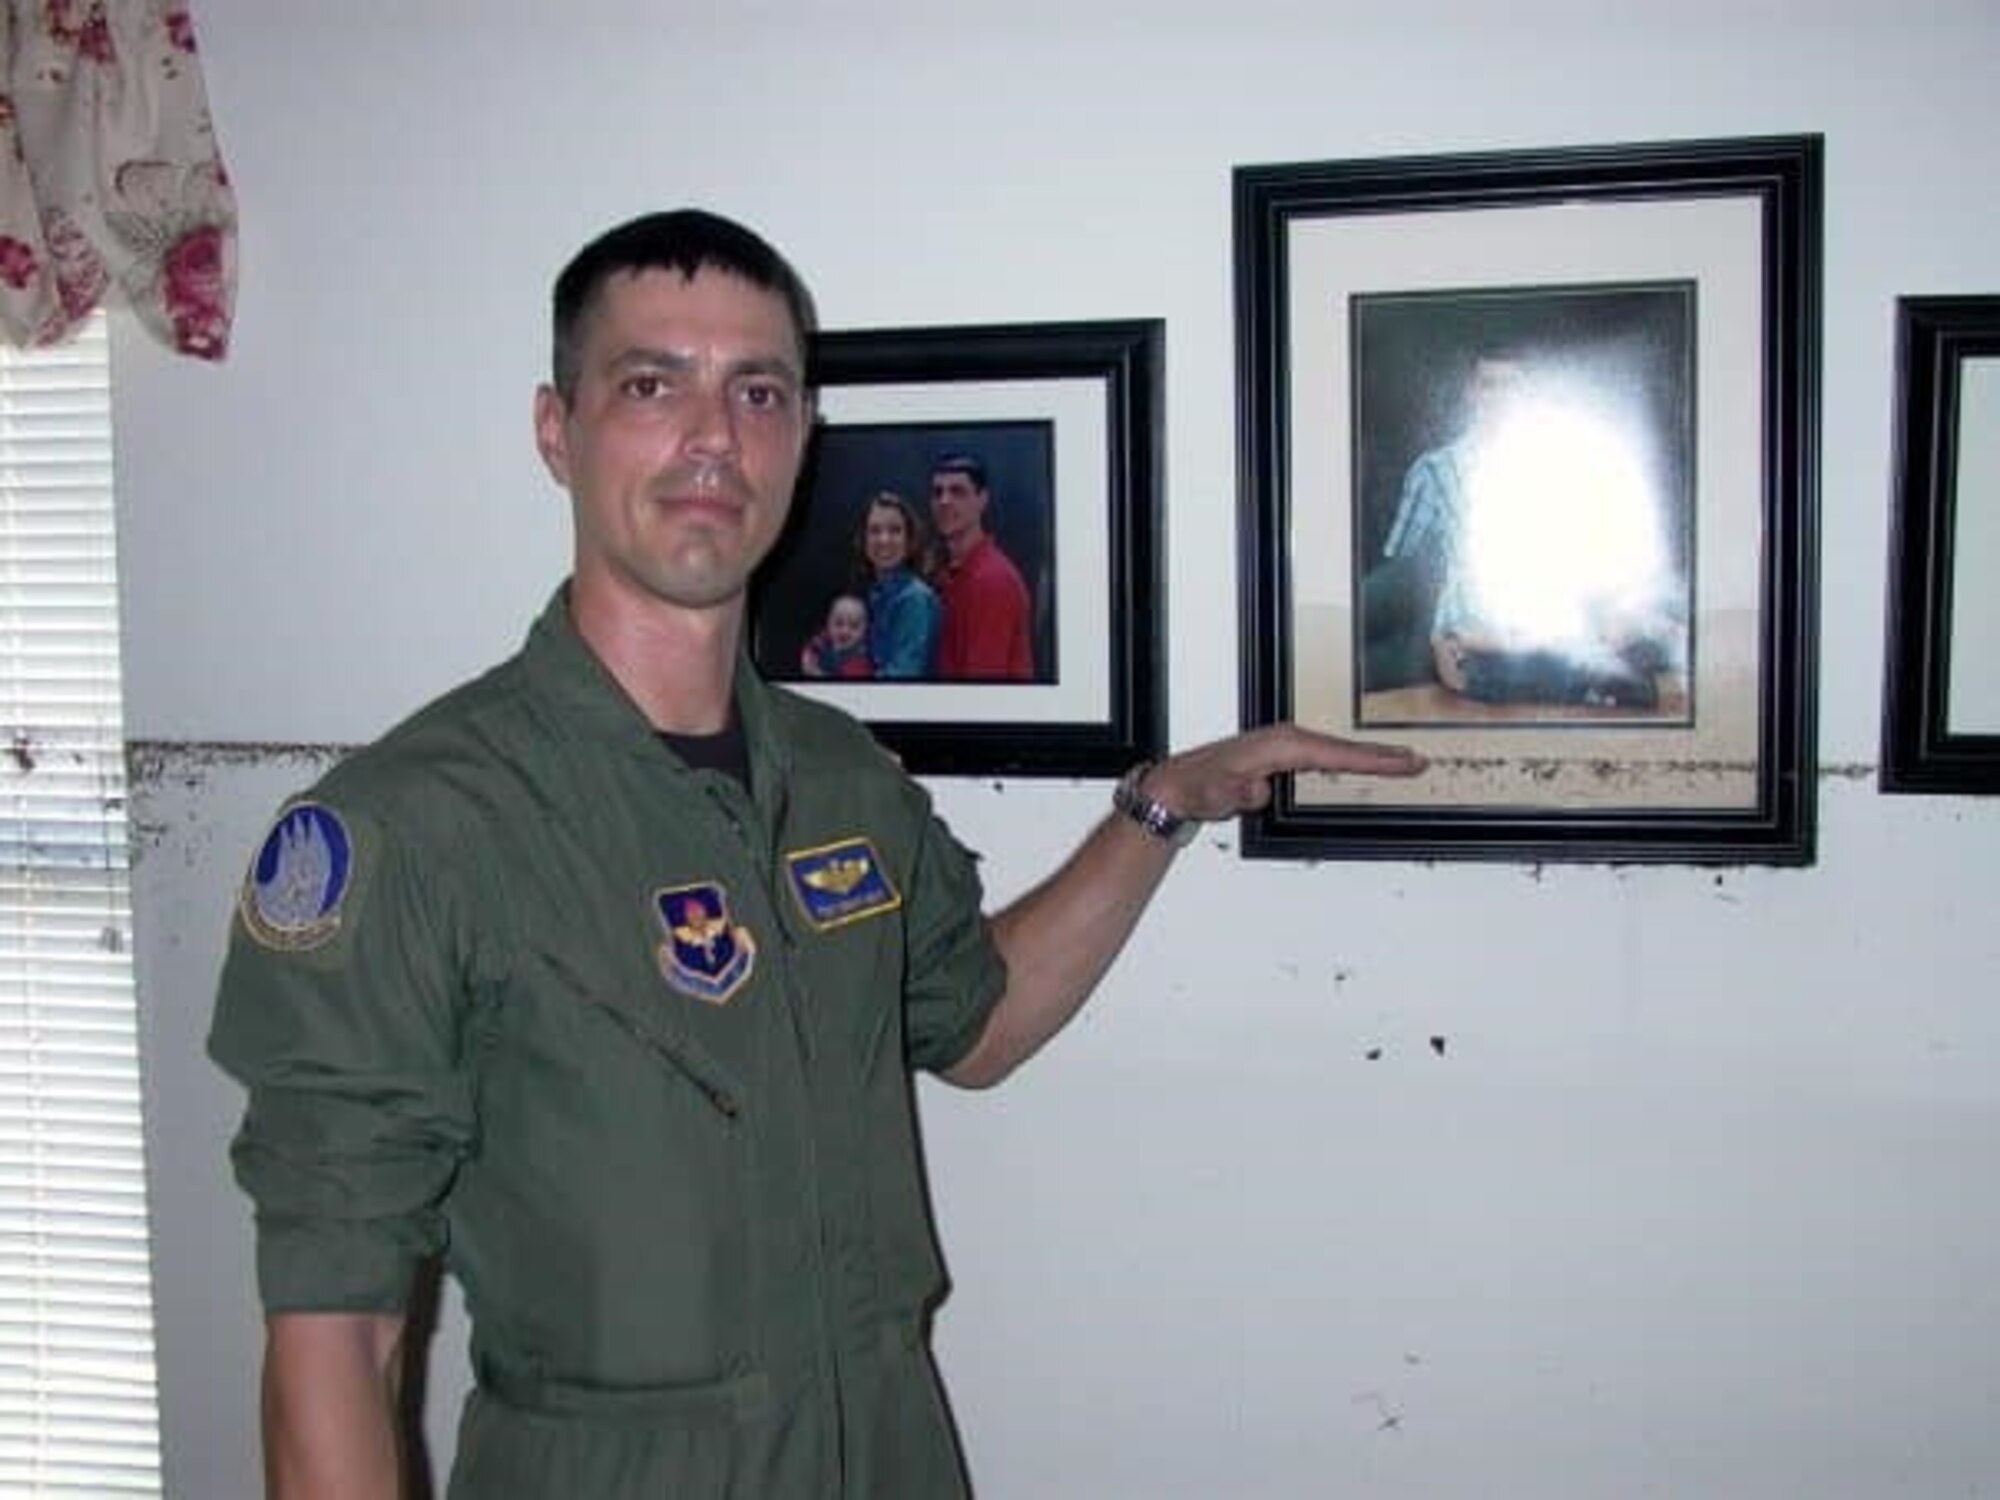 In 2005, Chief Master Sgt. Kenny Mott, 552nd Air Control Wing Command Chief, was assigned to Keesler Air Force Base, Mississippi when Hurricane Katrina overturned his World. Living through Hurricane Katrina has played a significant role in shaping Mott into the leader he is today (Courtesy photo).